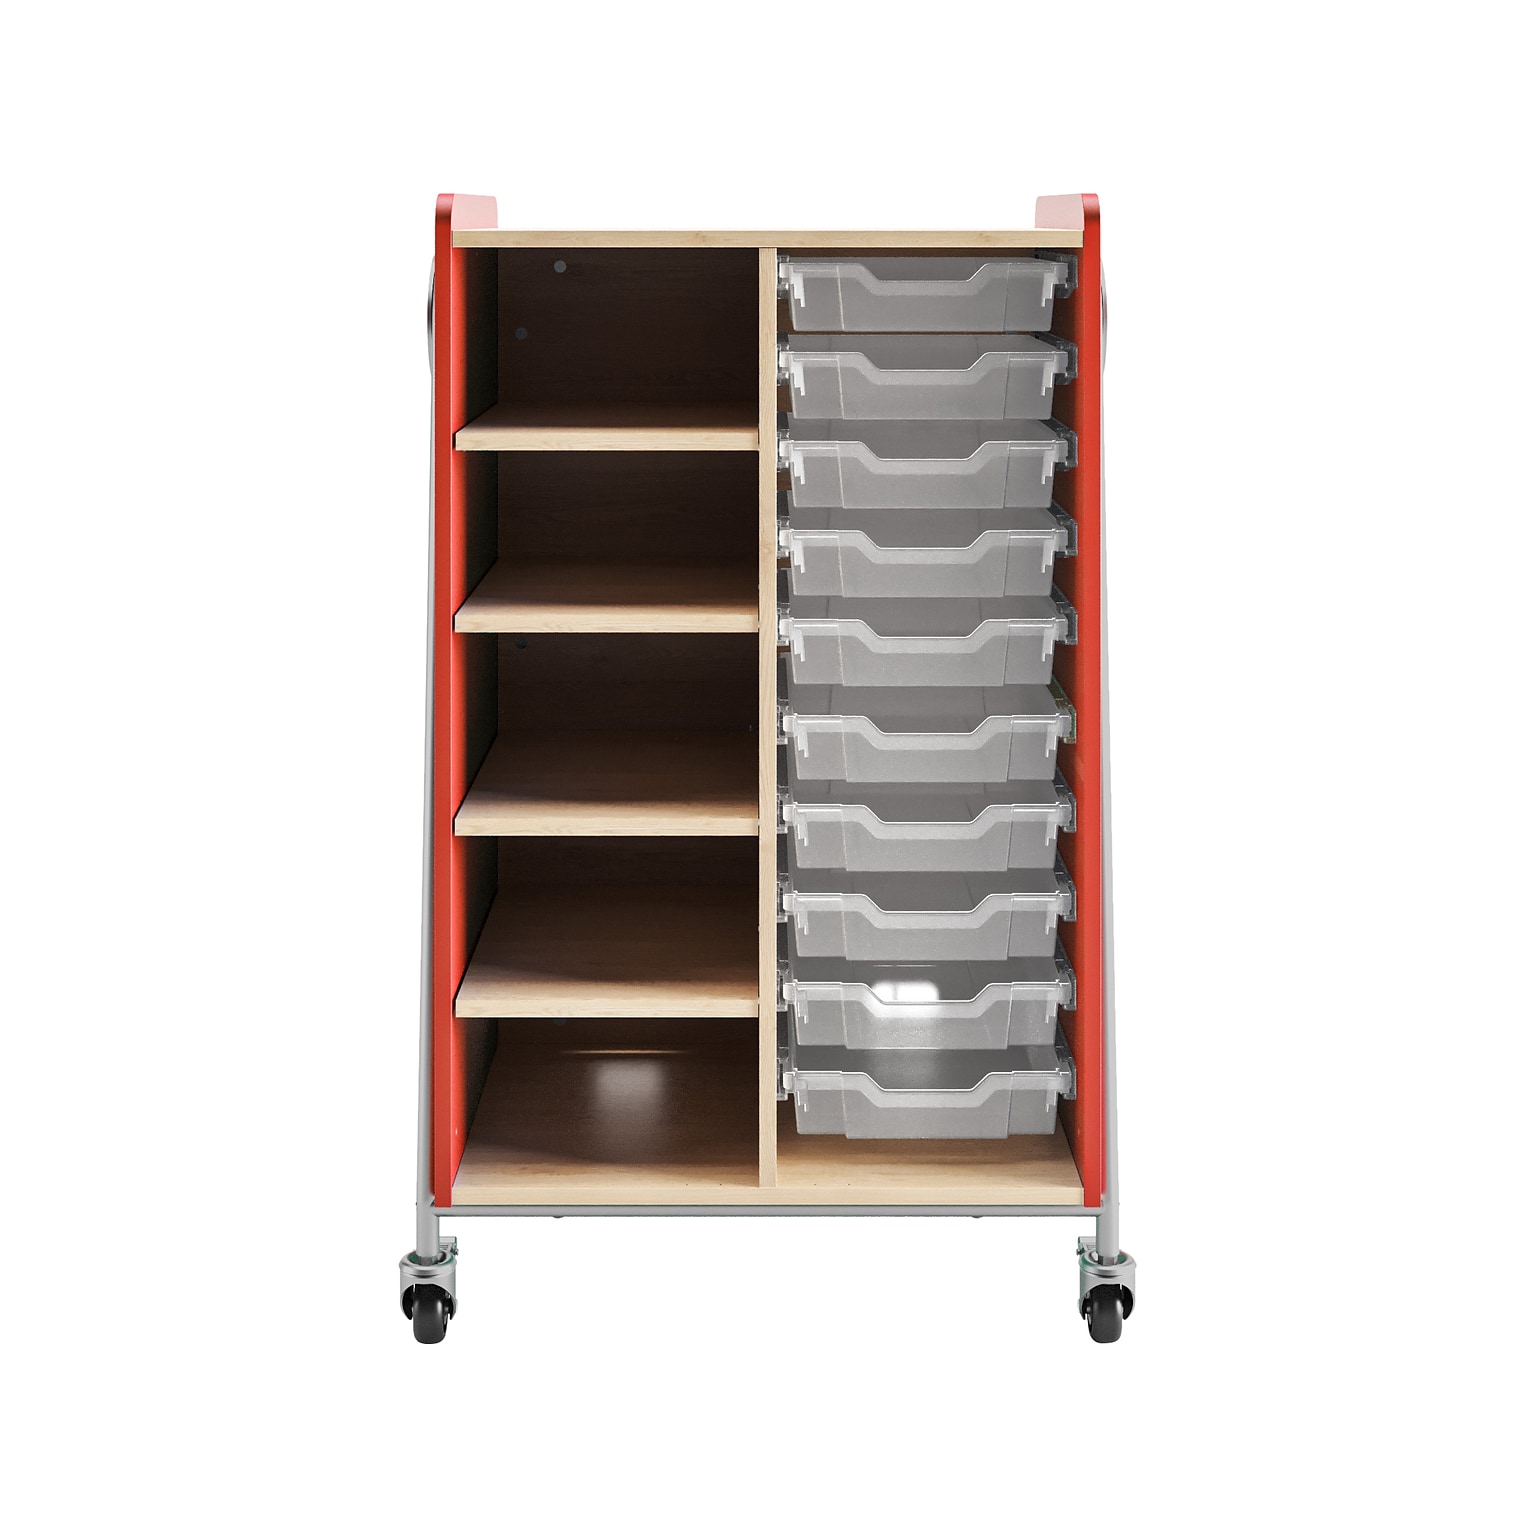 Safco Whiffle Typical 2 48 x 30 Particle Board Double-Column Mobile Storage, Red (3922RED)